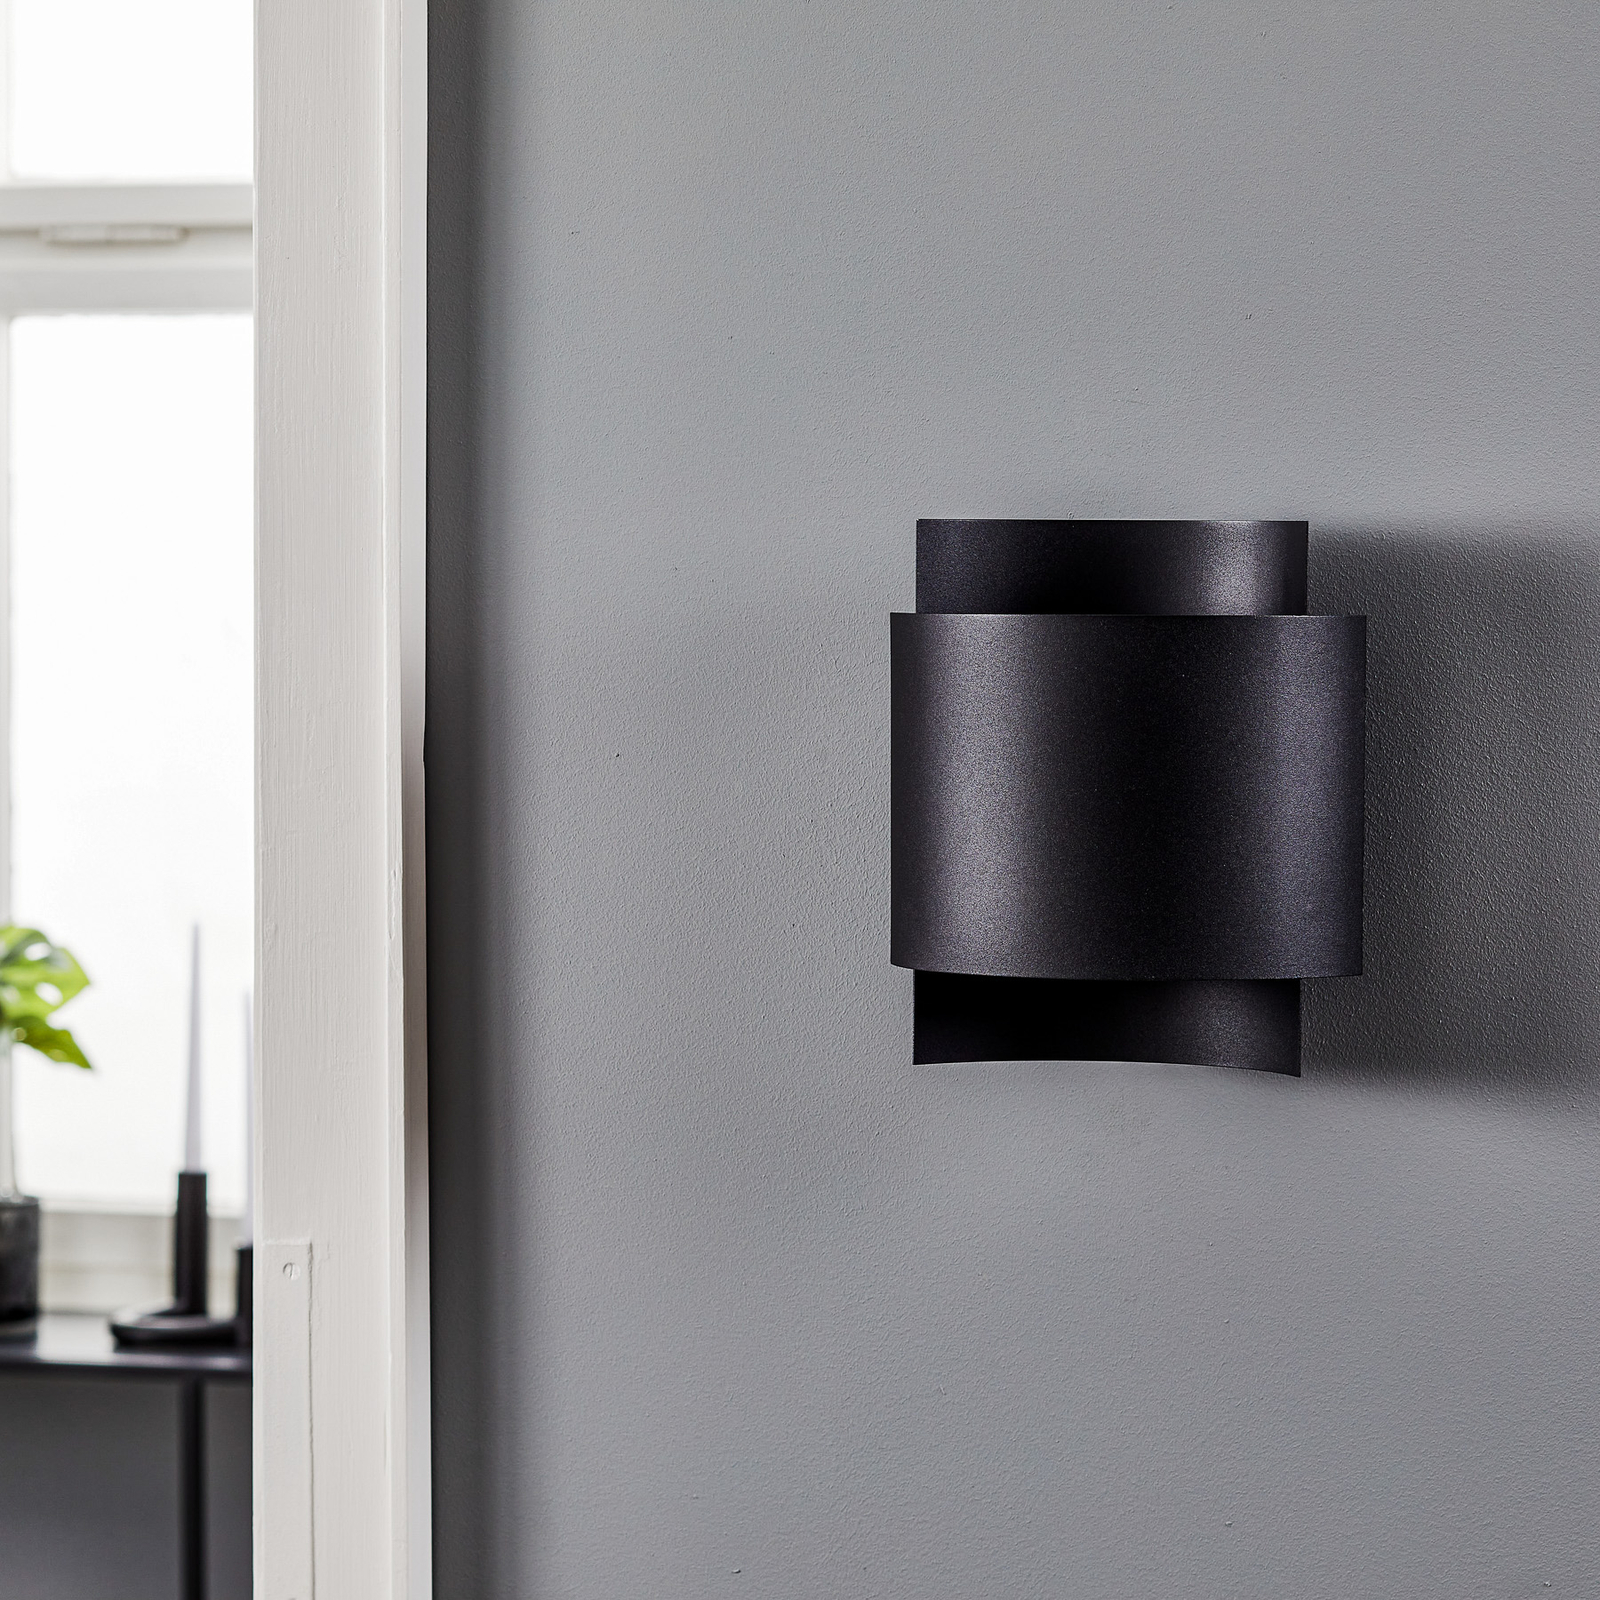 Pako wall lamp made of two steel plates in black